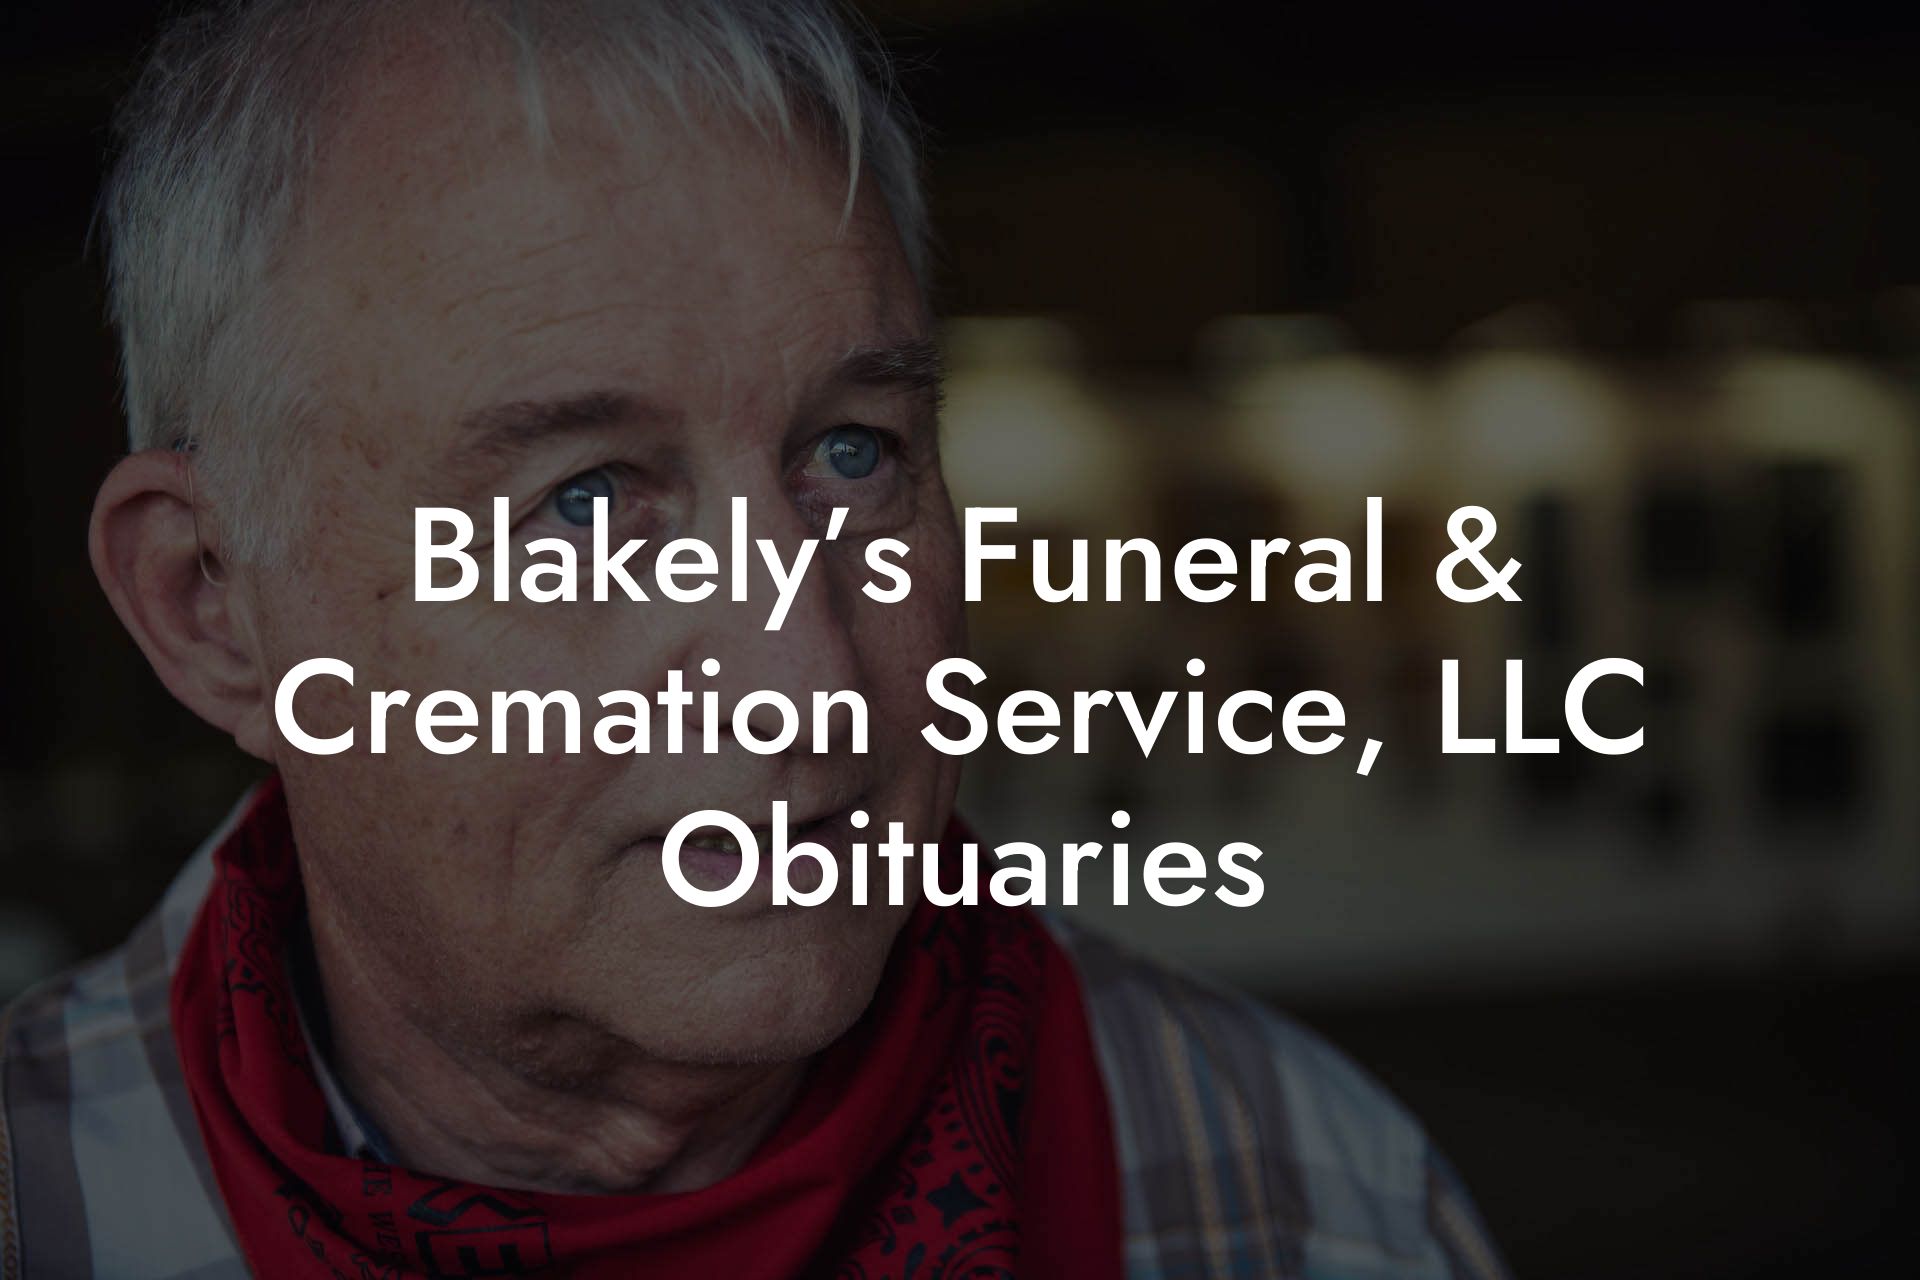 Blakely’s Funeral & Cremation Service, LLC Obituaries